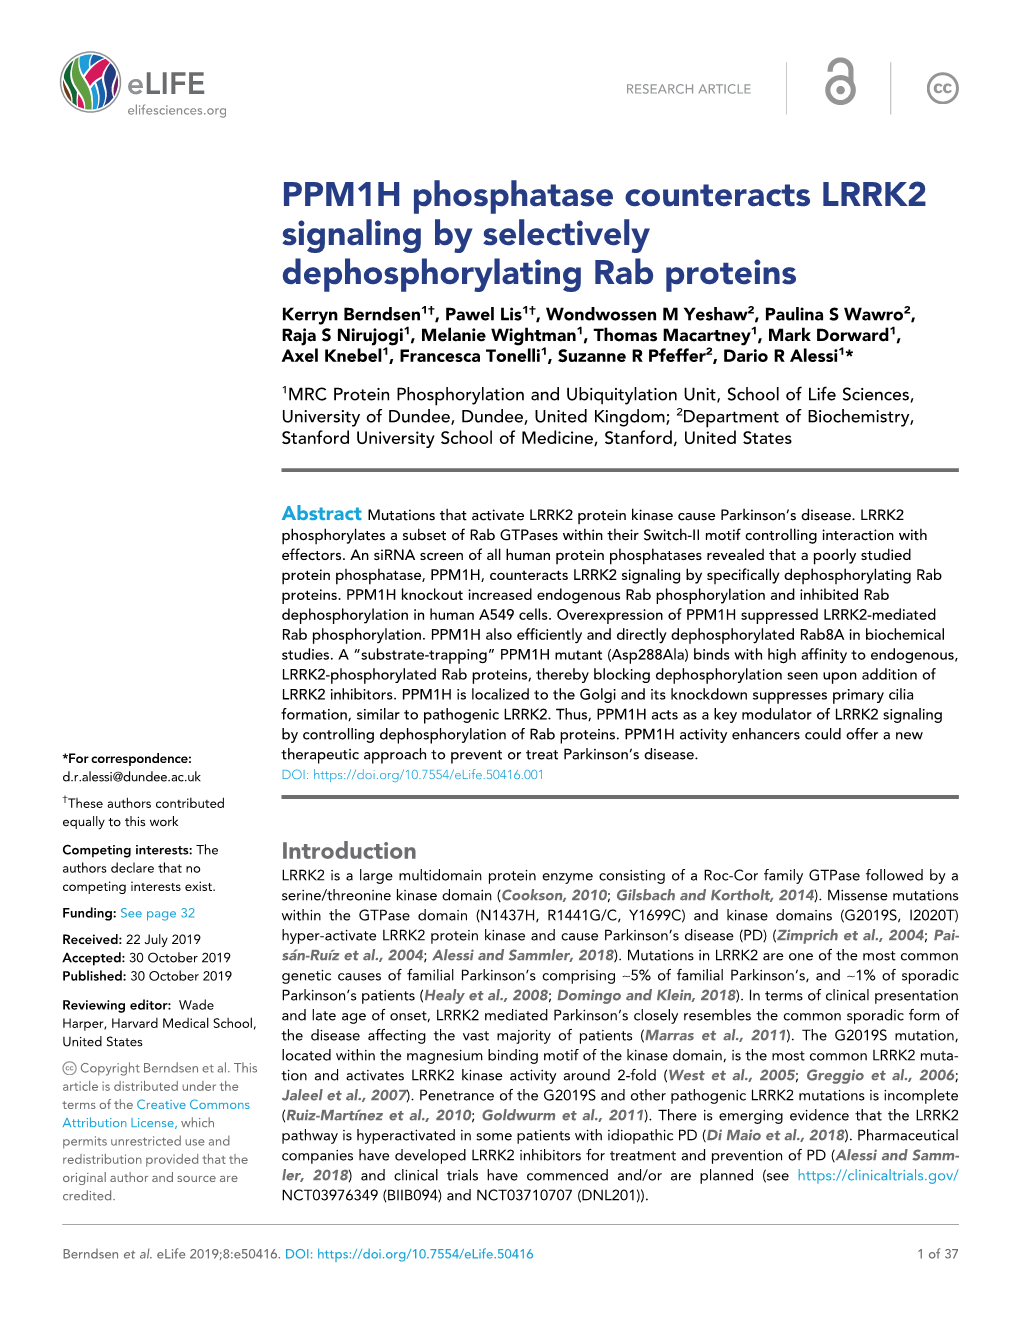 PPM1H Phosphatase Counteracts LRRK2 Signaling by Selectively